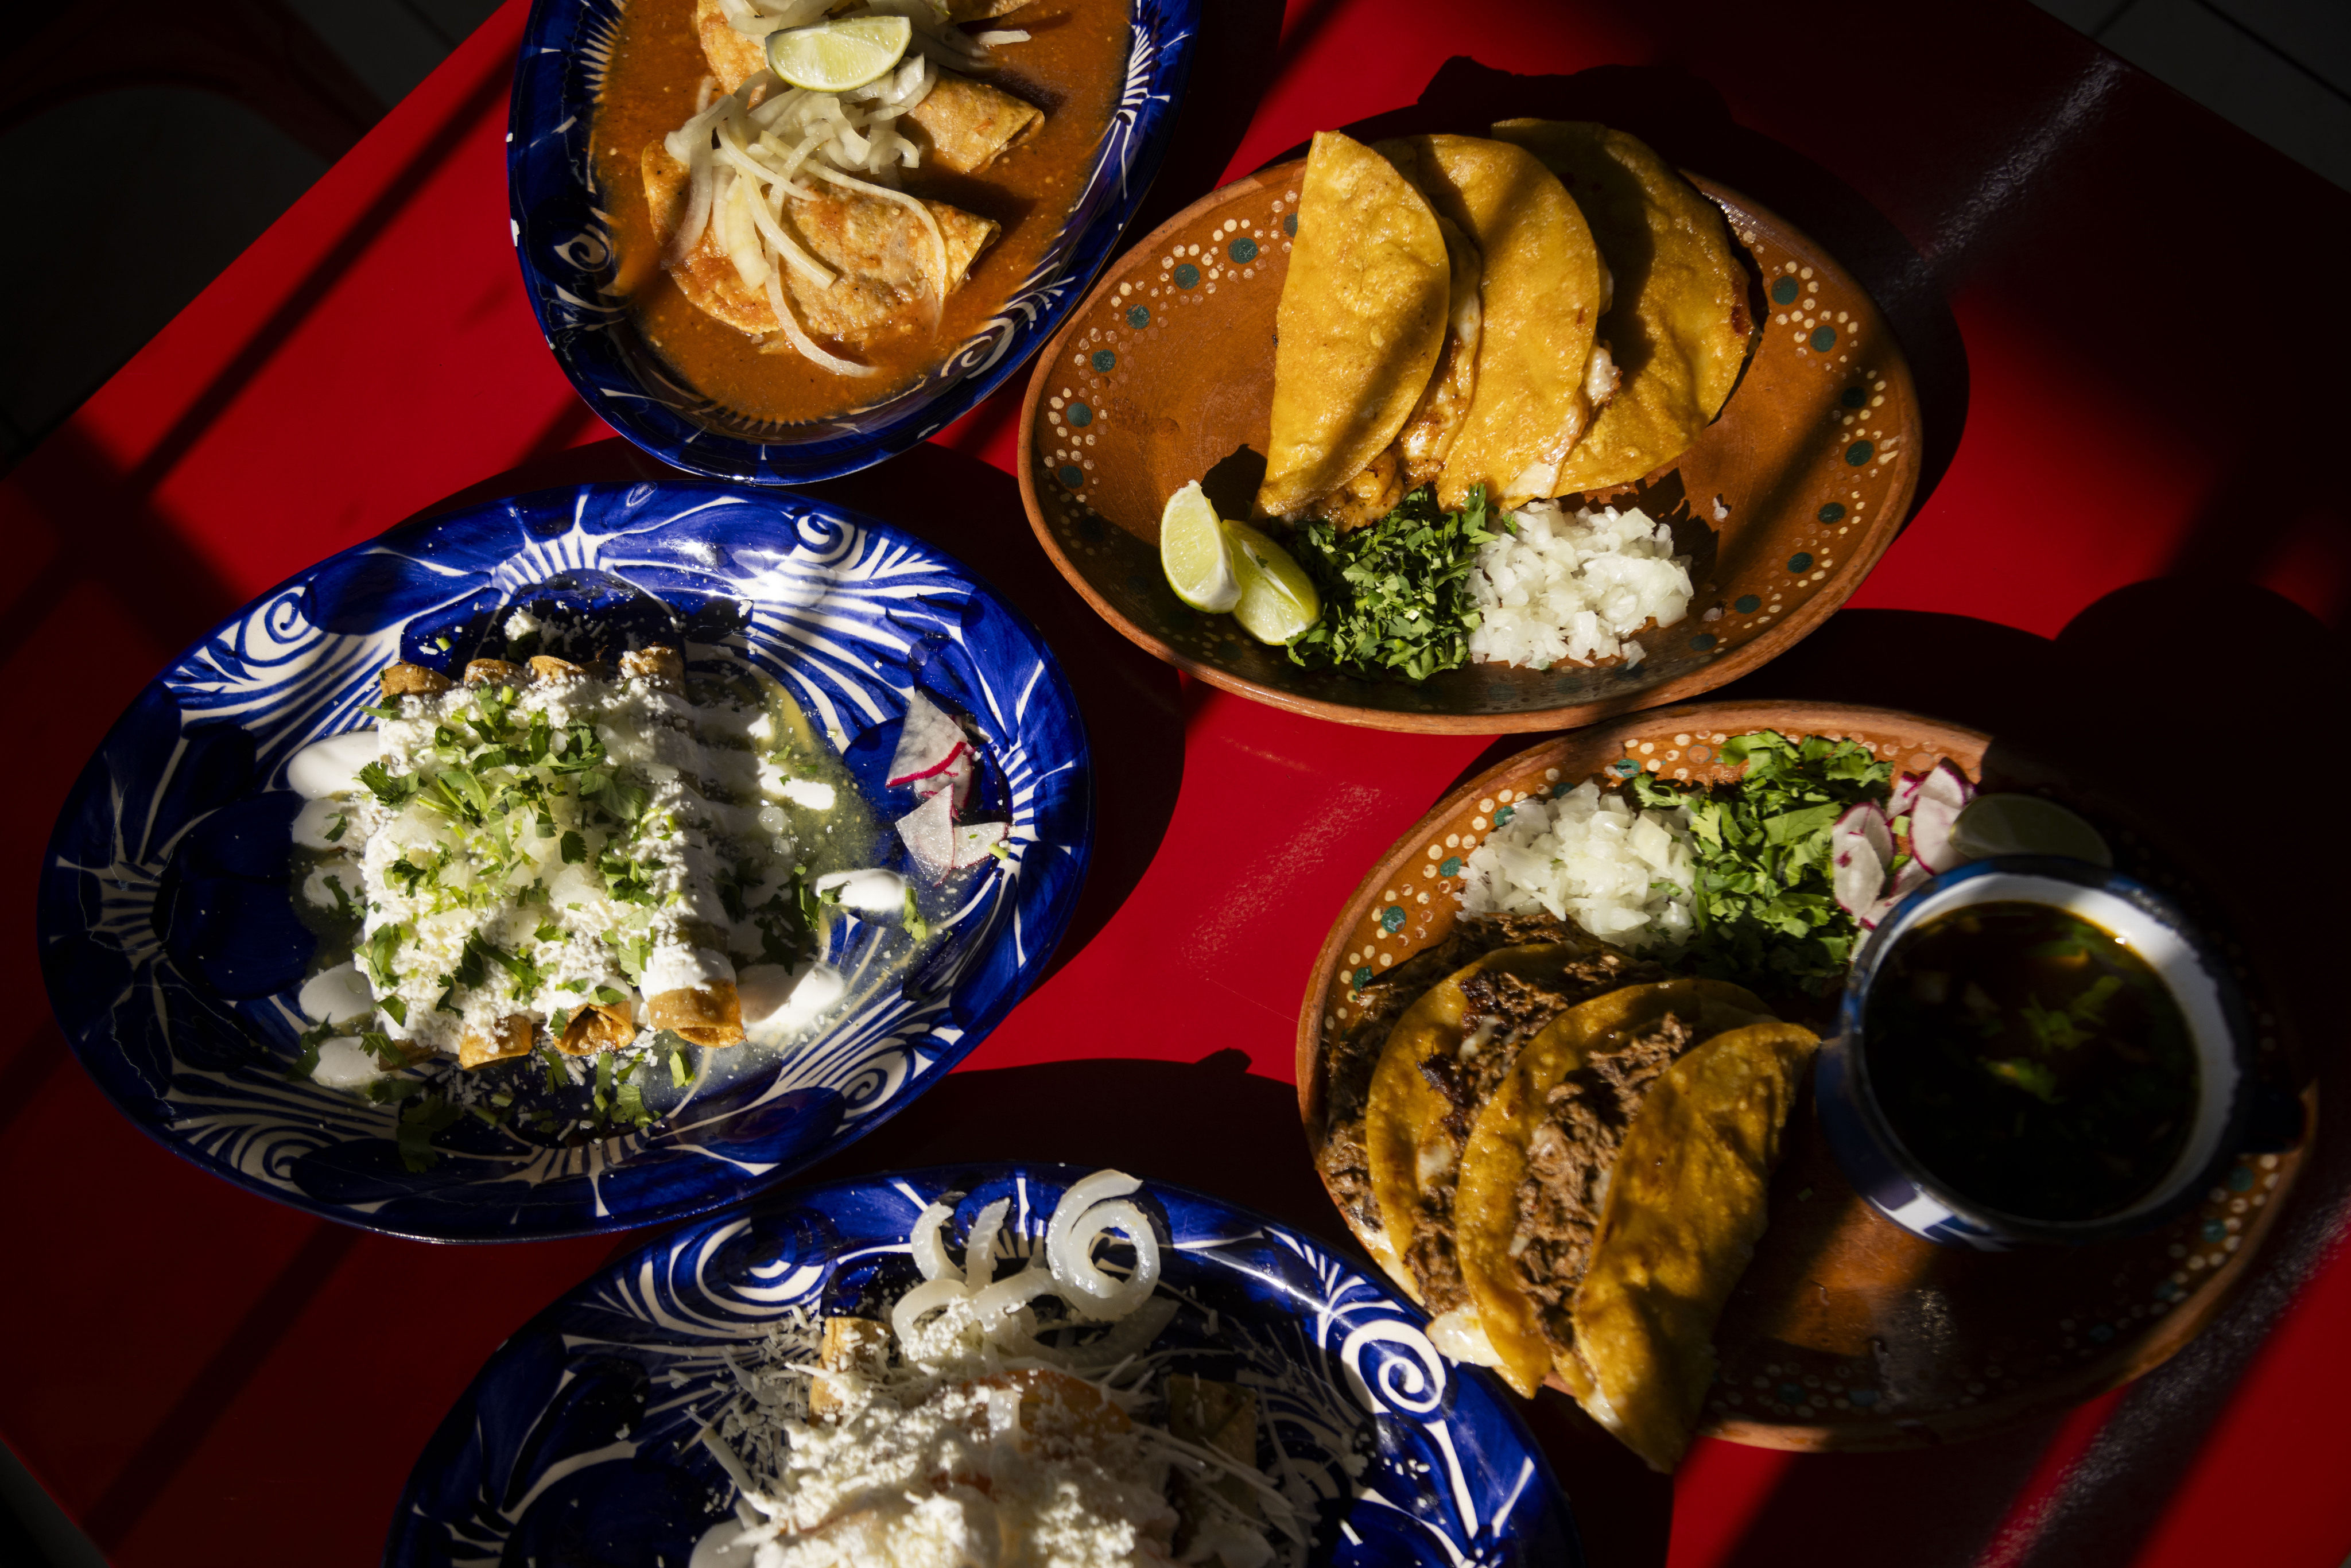 Spanish Food vs. Mexican Food: What's the Difference? - El Tapatio